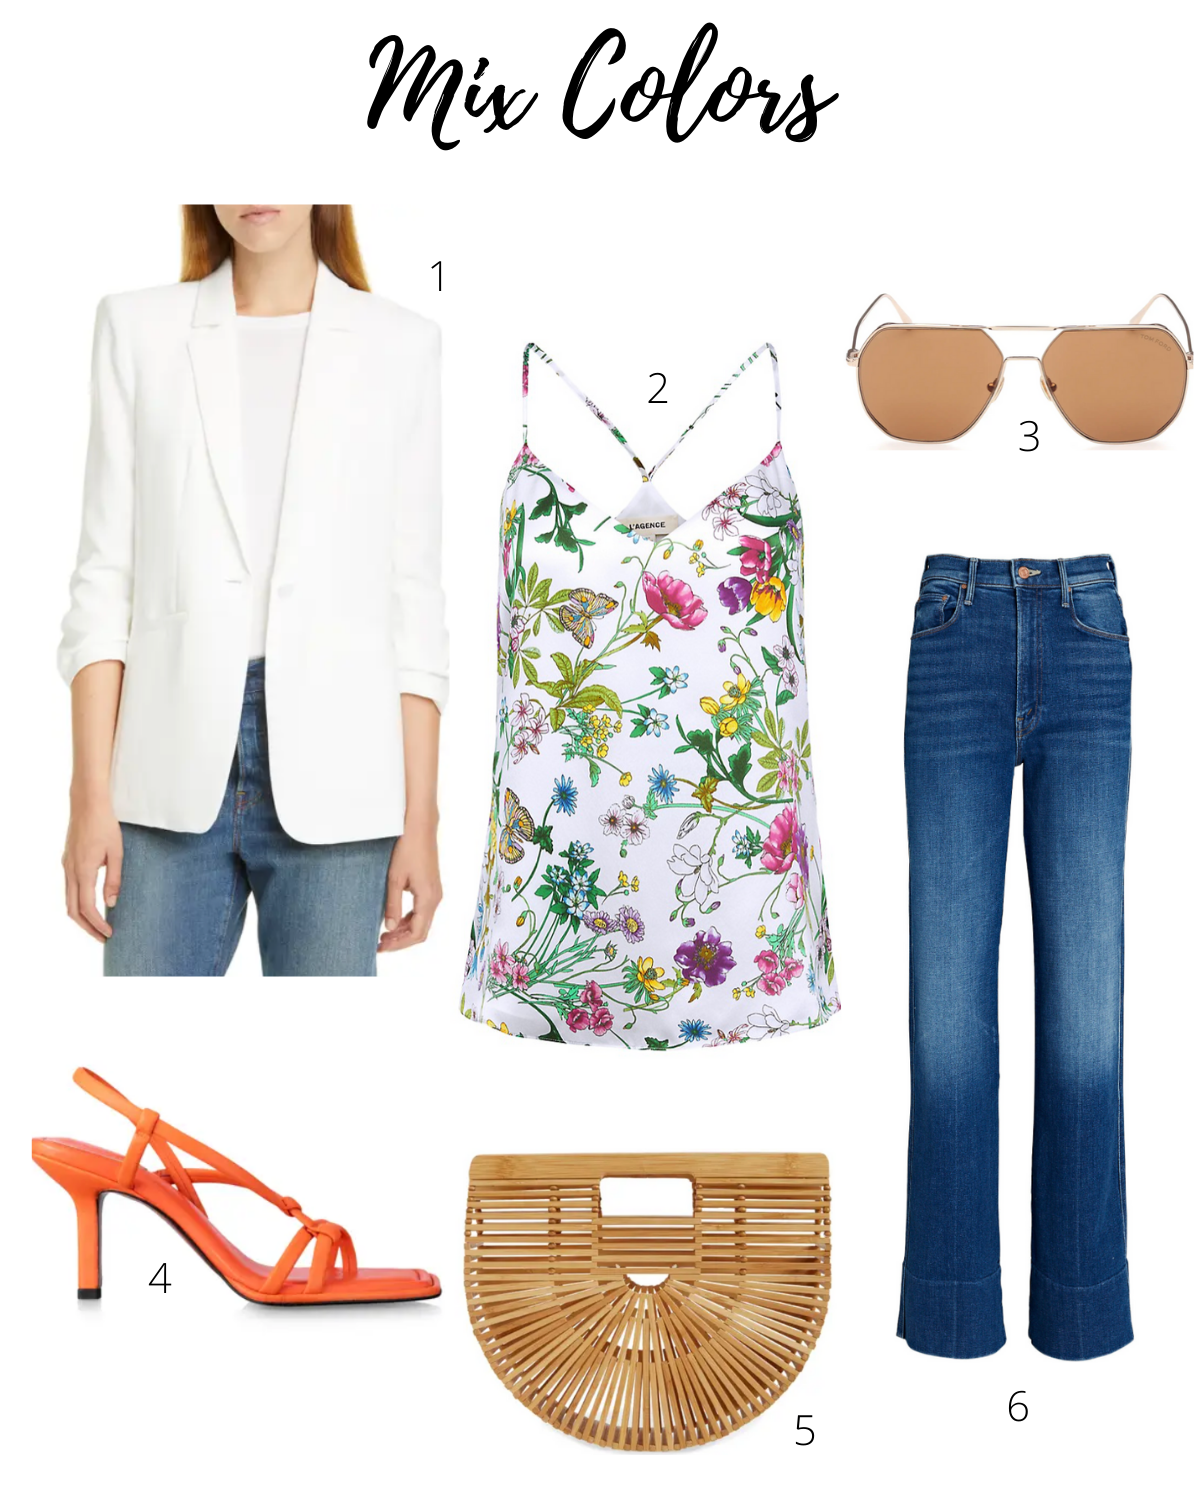 A style board featuring Frame sandals in orange crush, a floral L'Agence camisole, and MOTHER jeans.